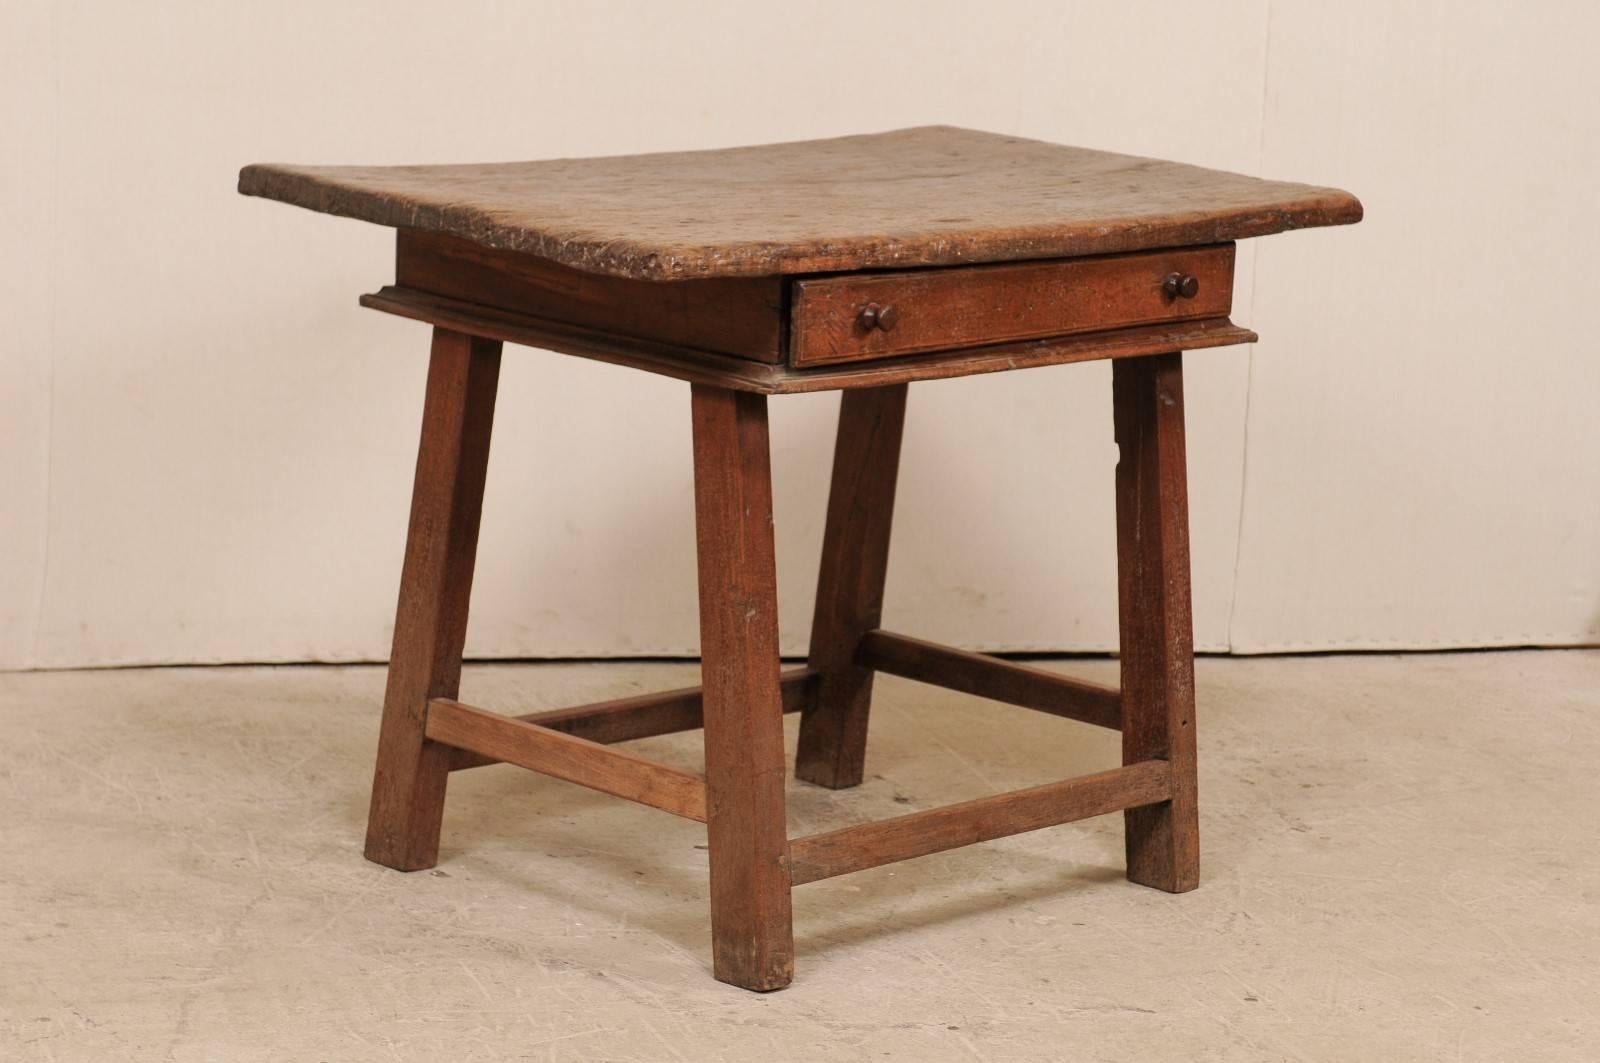 Carved 18th Century Brazilian Peroba Tropical Wood Side Table with Single Drawer For Sale